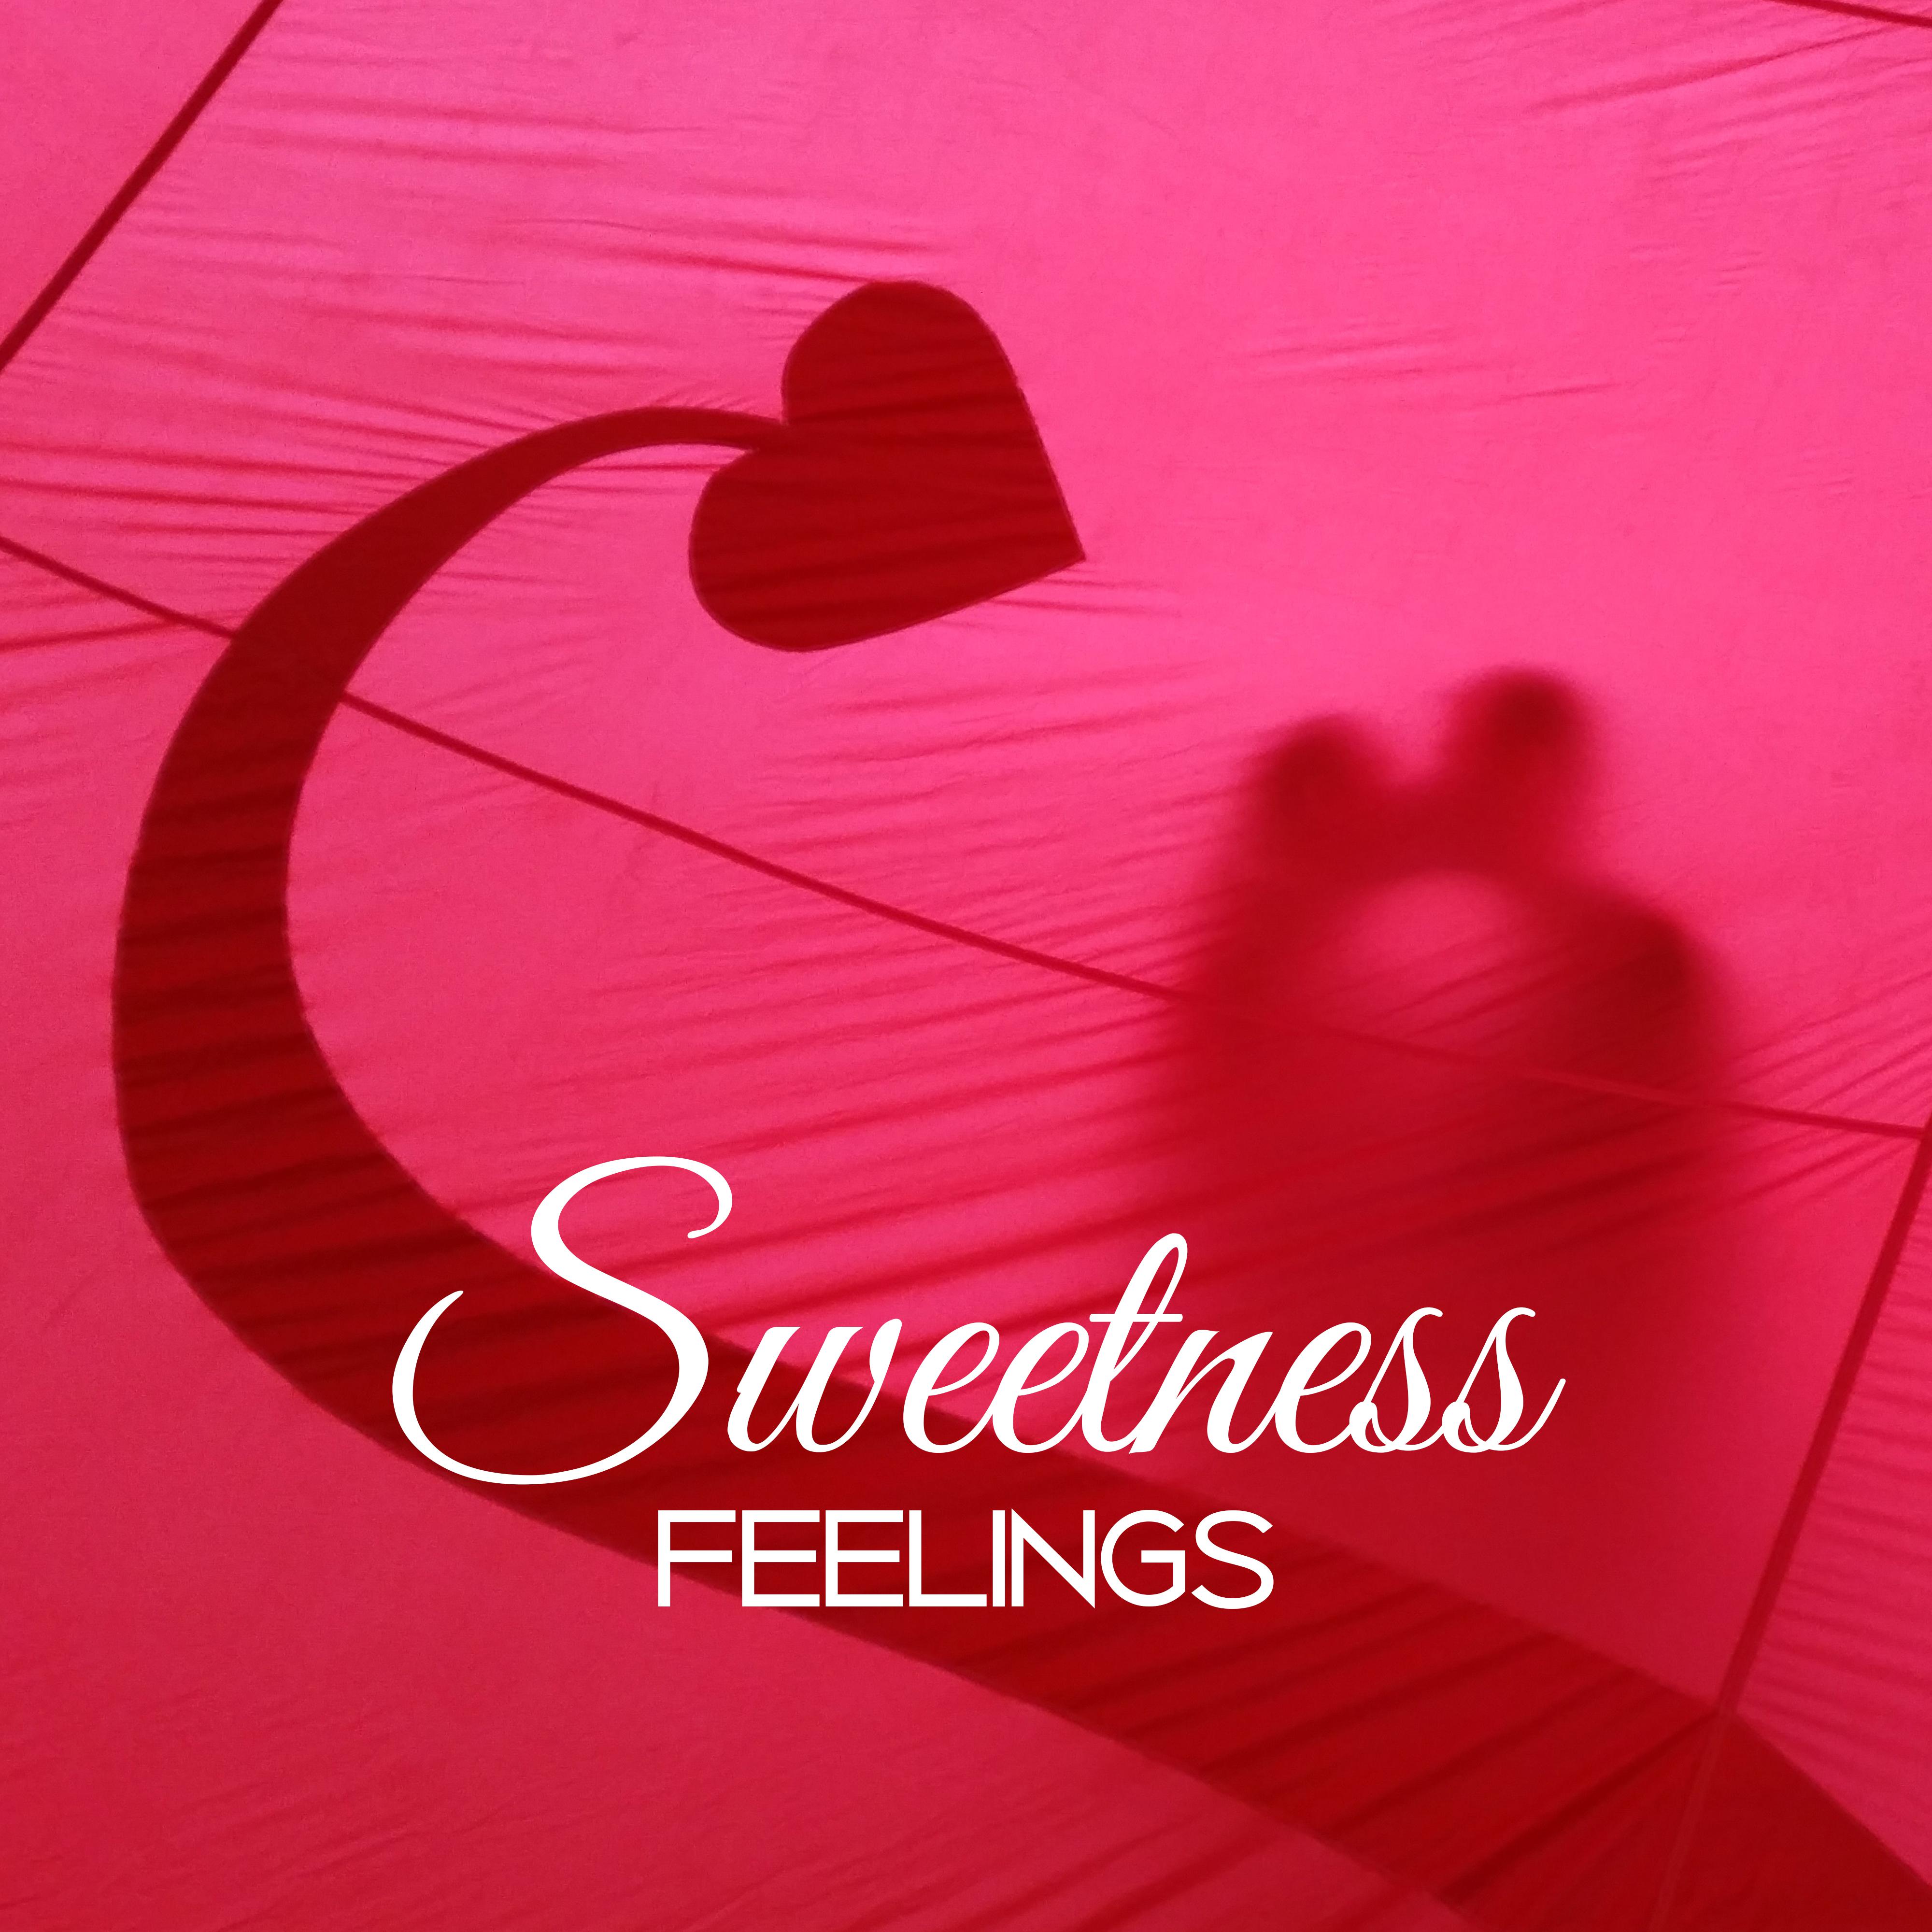 Sweetness Feelings – Jazz for Love, Sensual Music, Romantic Evening, **** Piano, Deep Relax for Lovers